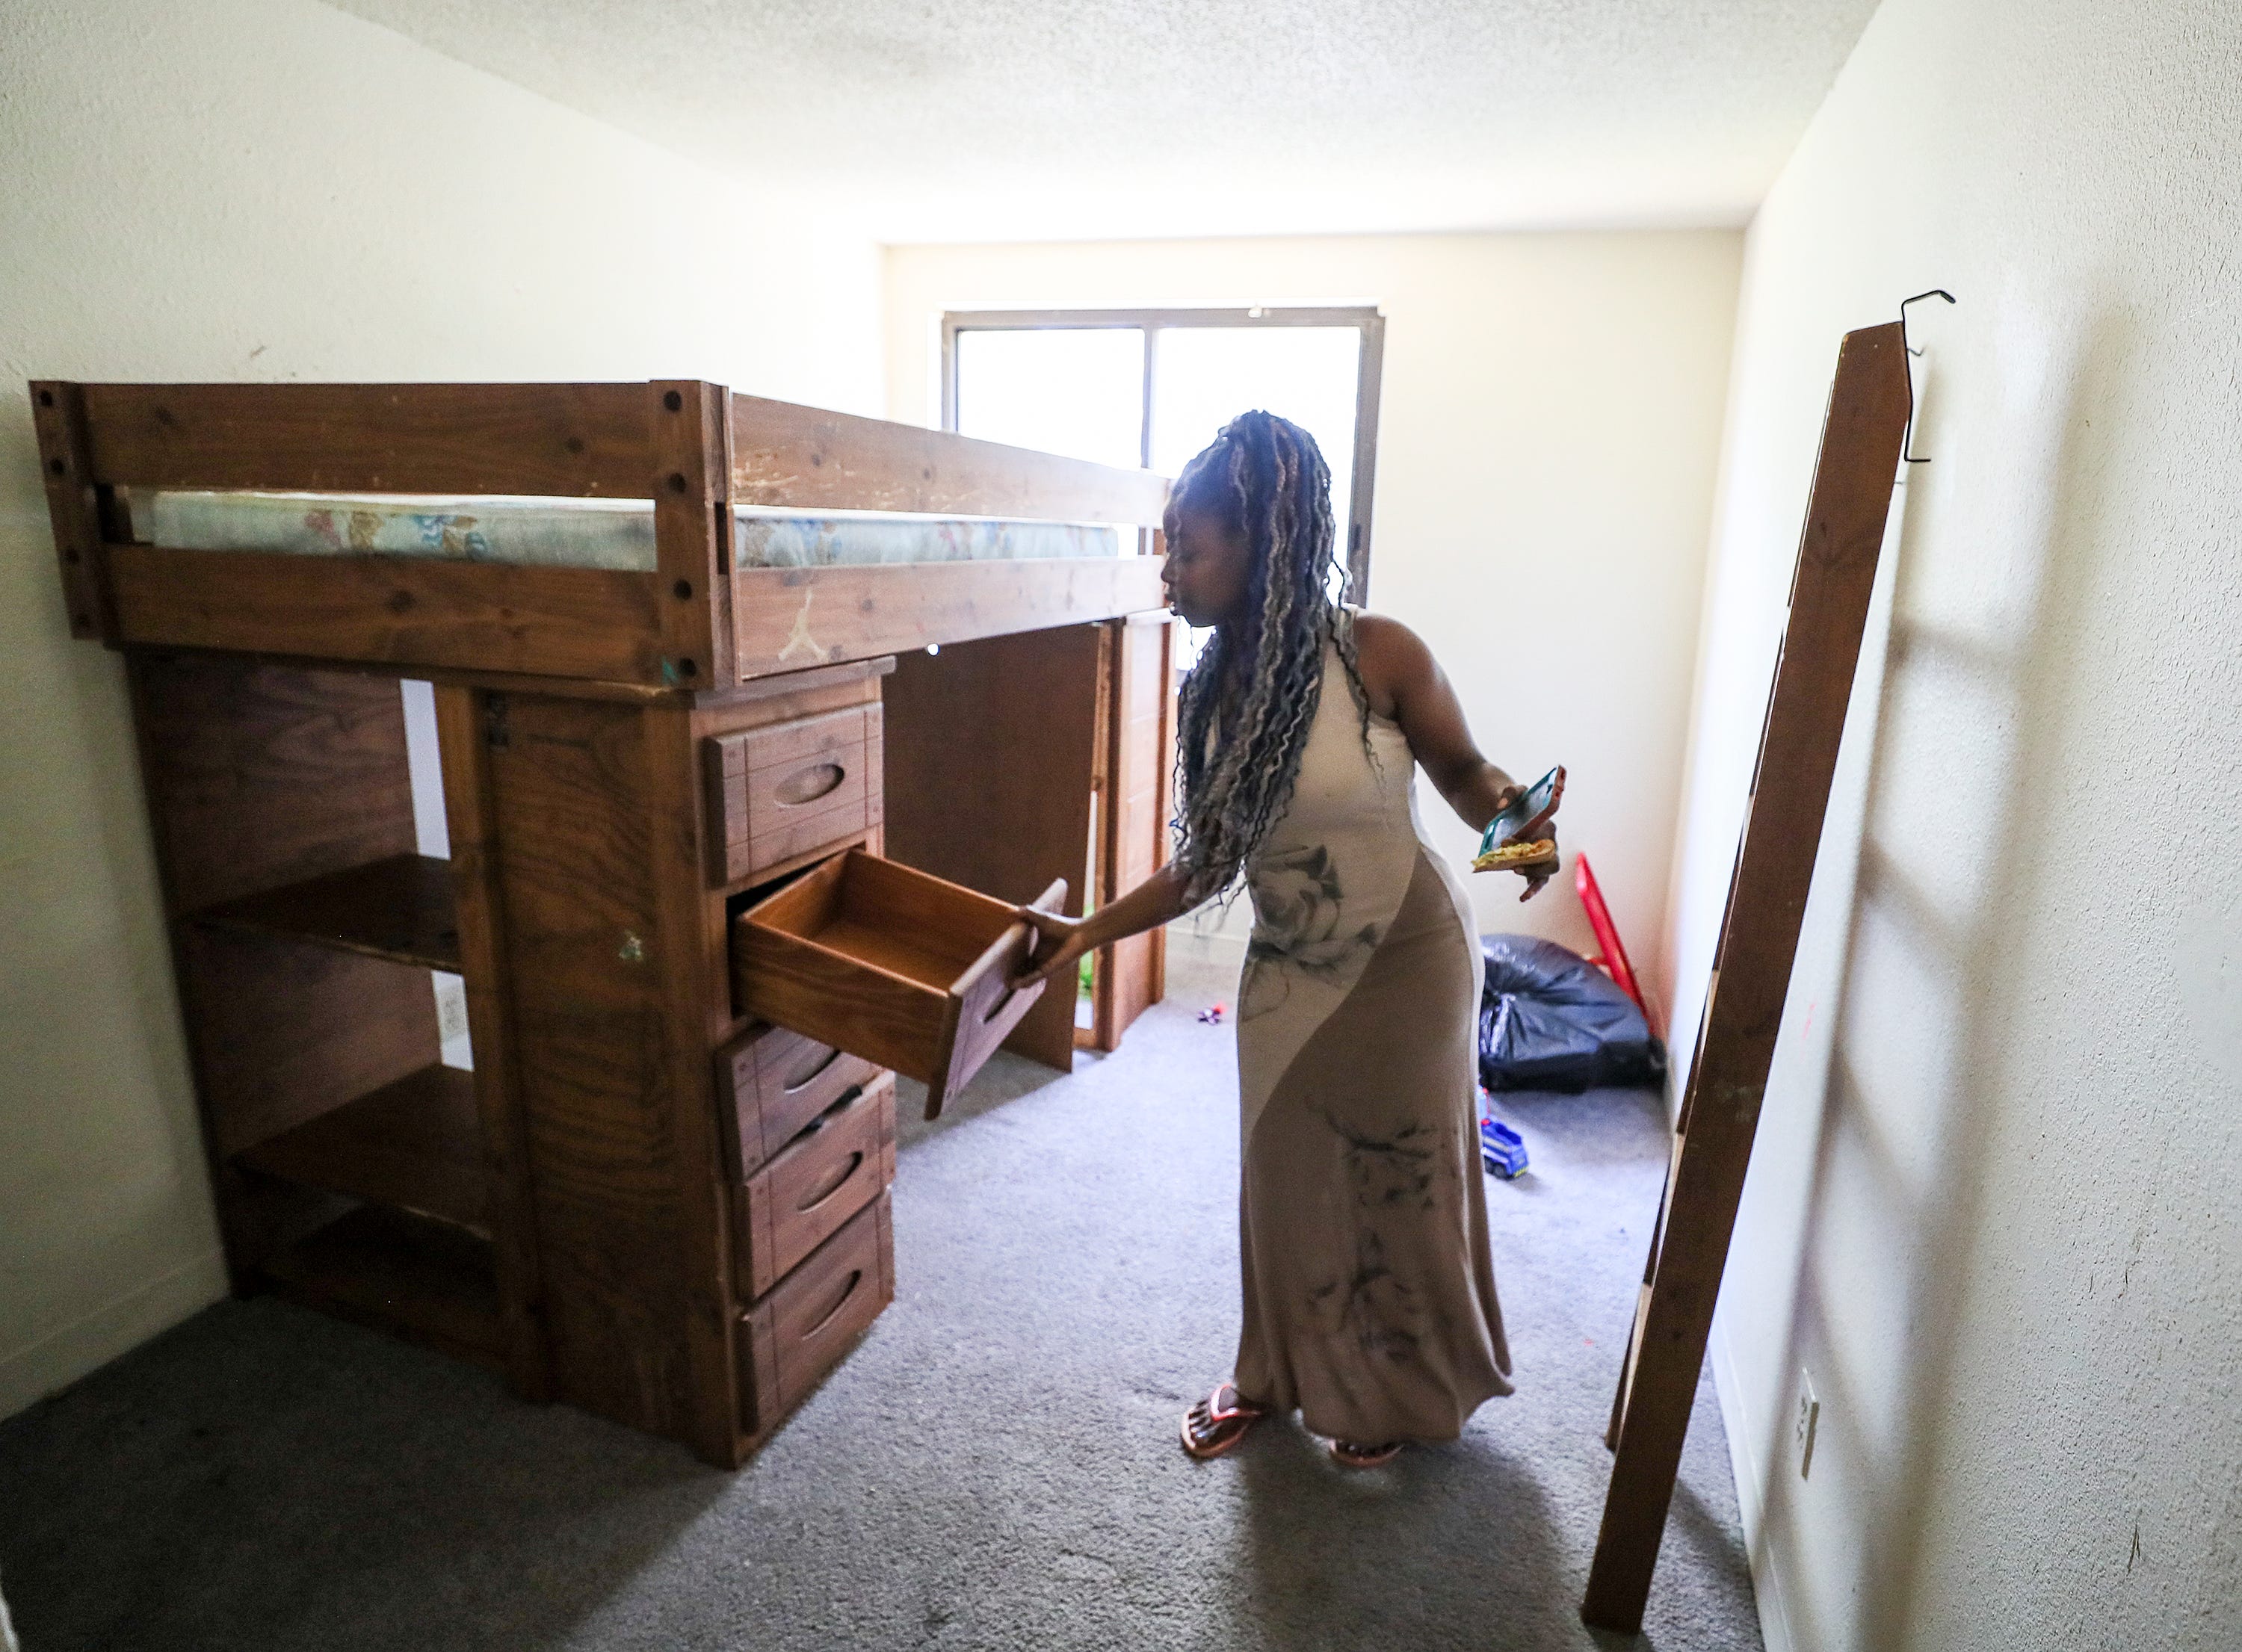 Kwmisha Adams shows the empty drawers in her sons' room.  Adams is being evicted from her apartment and preparing to leave. August 19, 2020